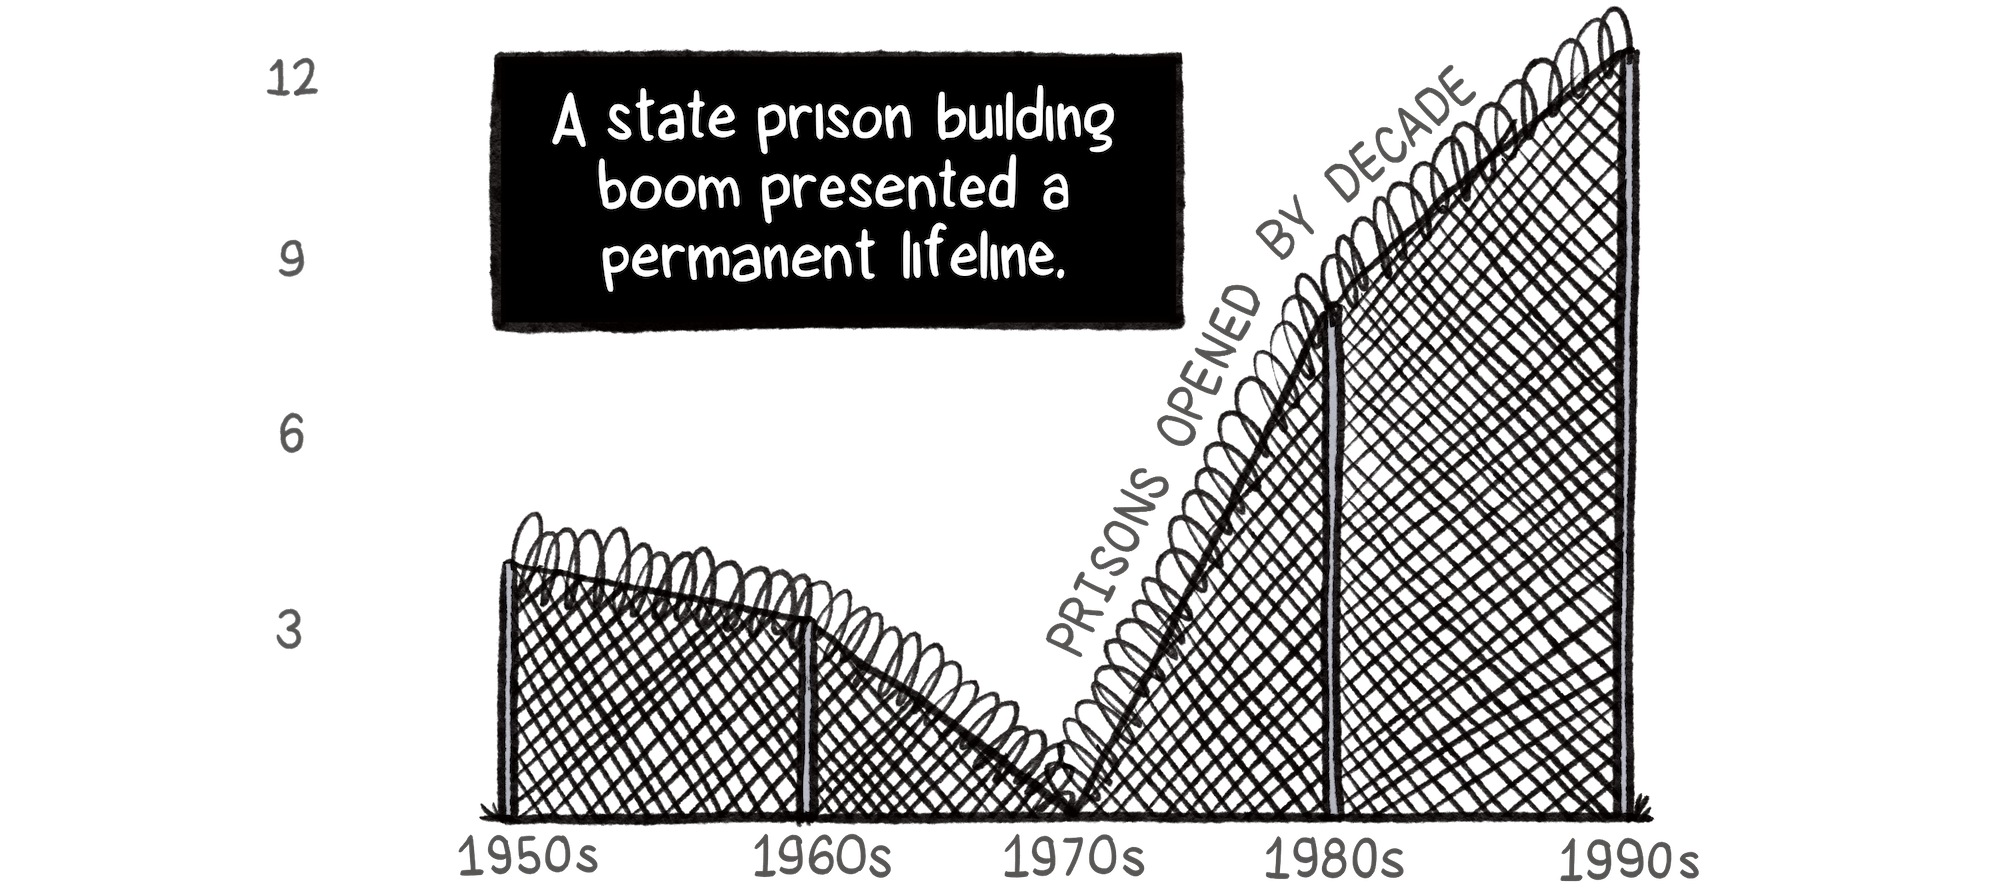 A state prison building boom presented a permanent lifeline. A line chart that looks like a chain-link fence with barbed wire depicts the increase in the number of prisons opened per decade from the 1960s to the 1990s.